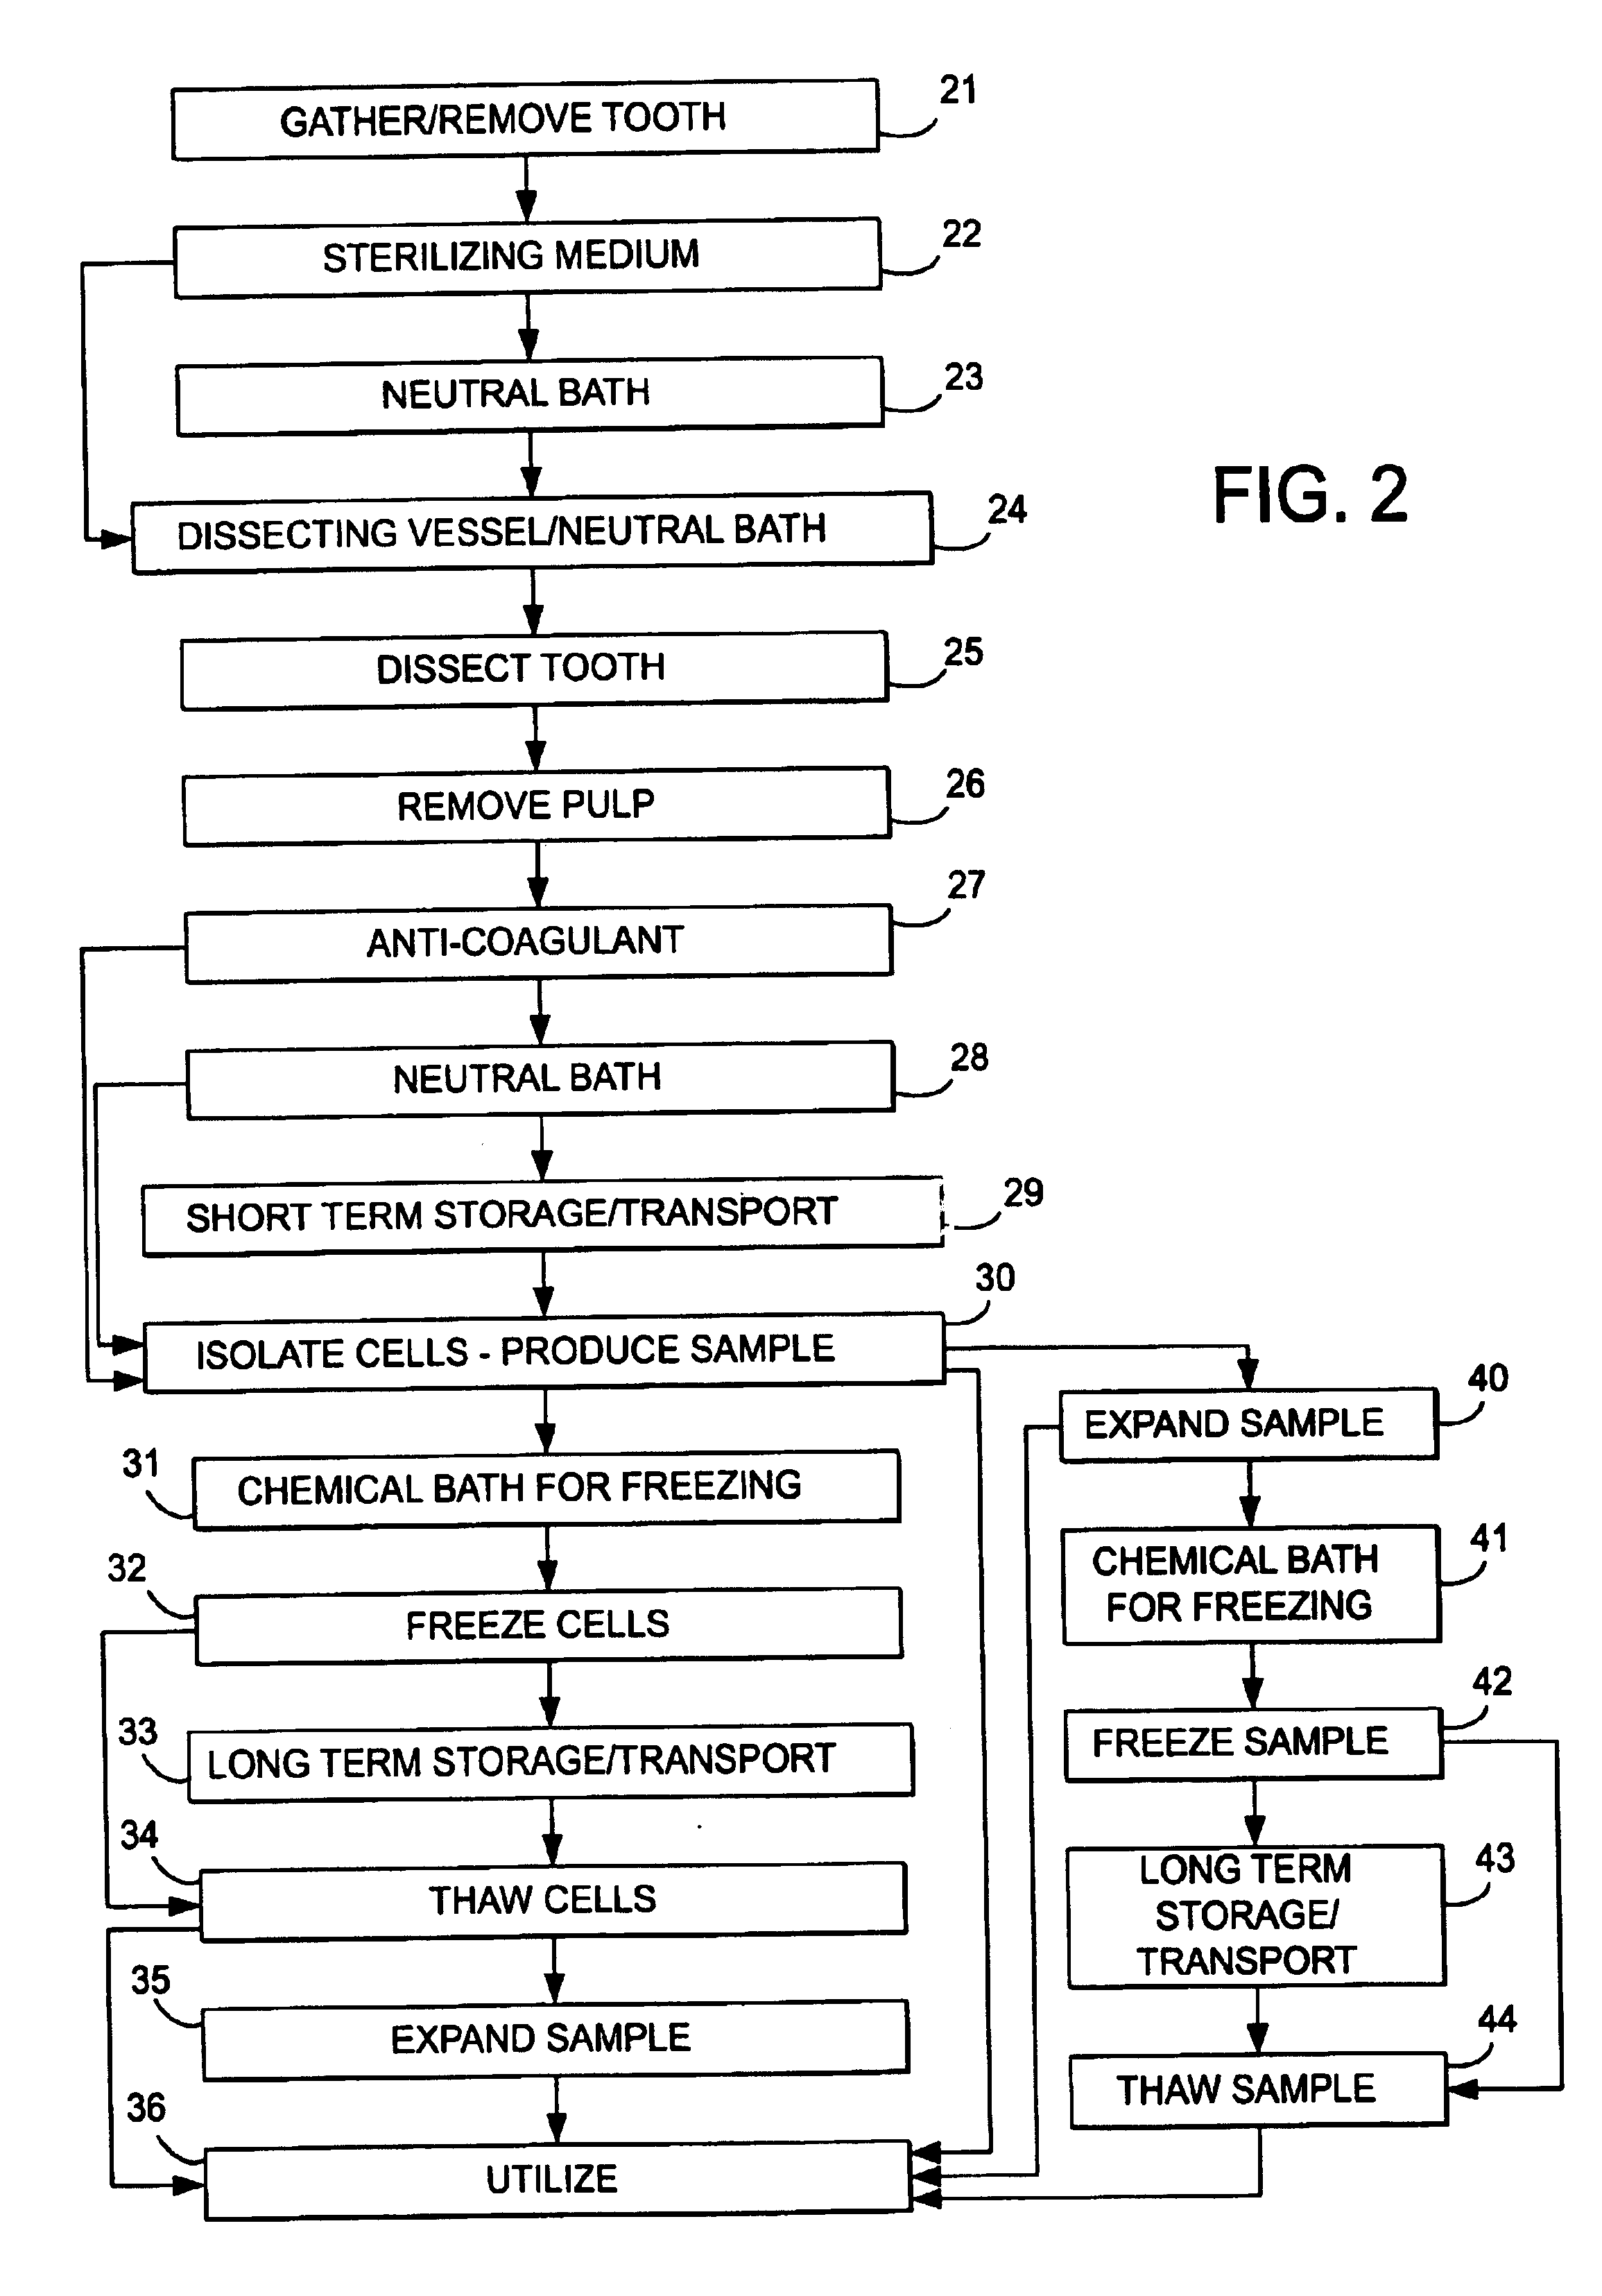 Stem cell and dental pulp harvesting method and apparatus